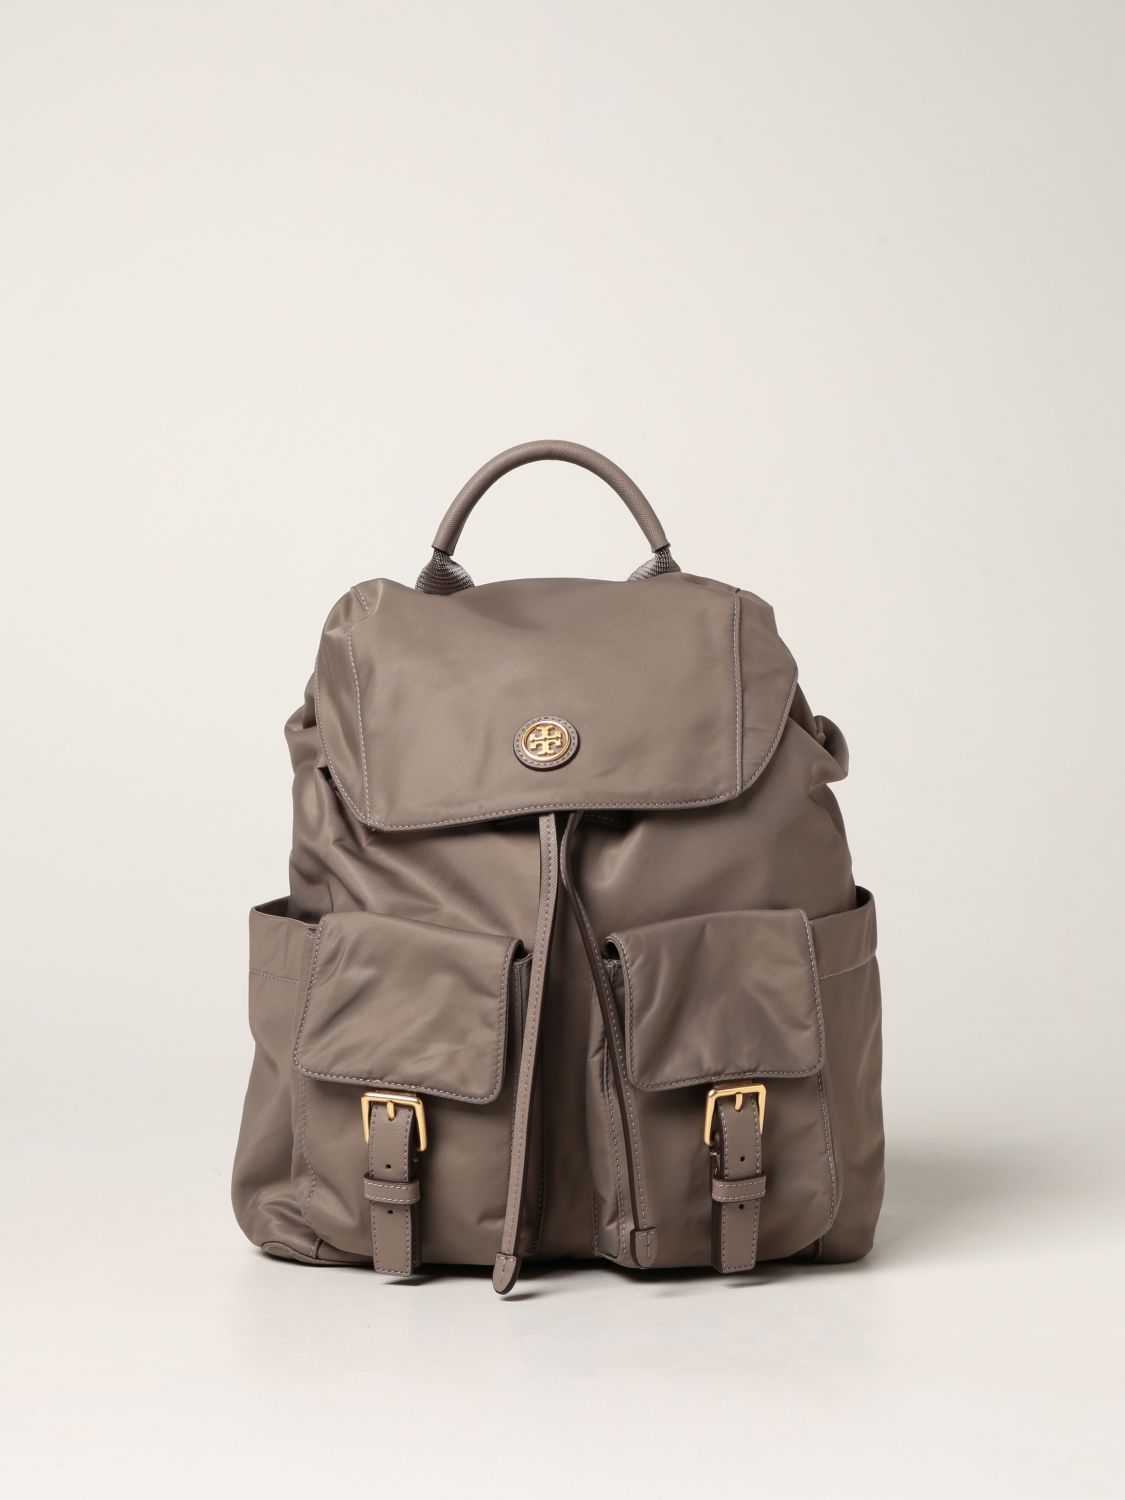 Tory Burch Leather Backpack in Gray